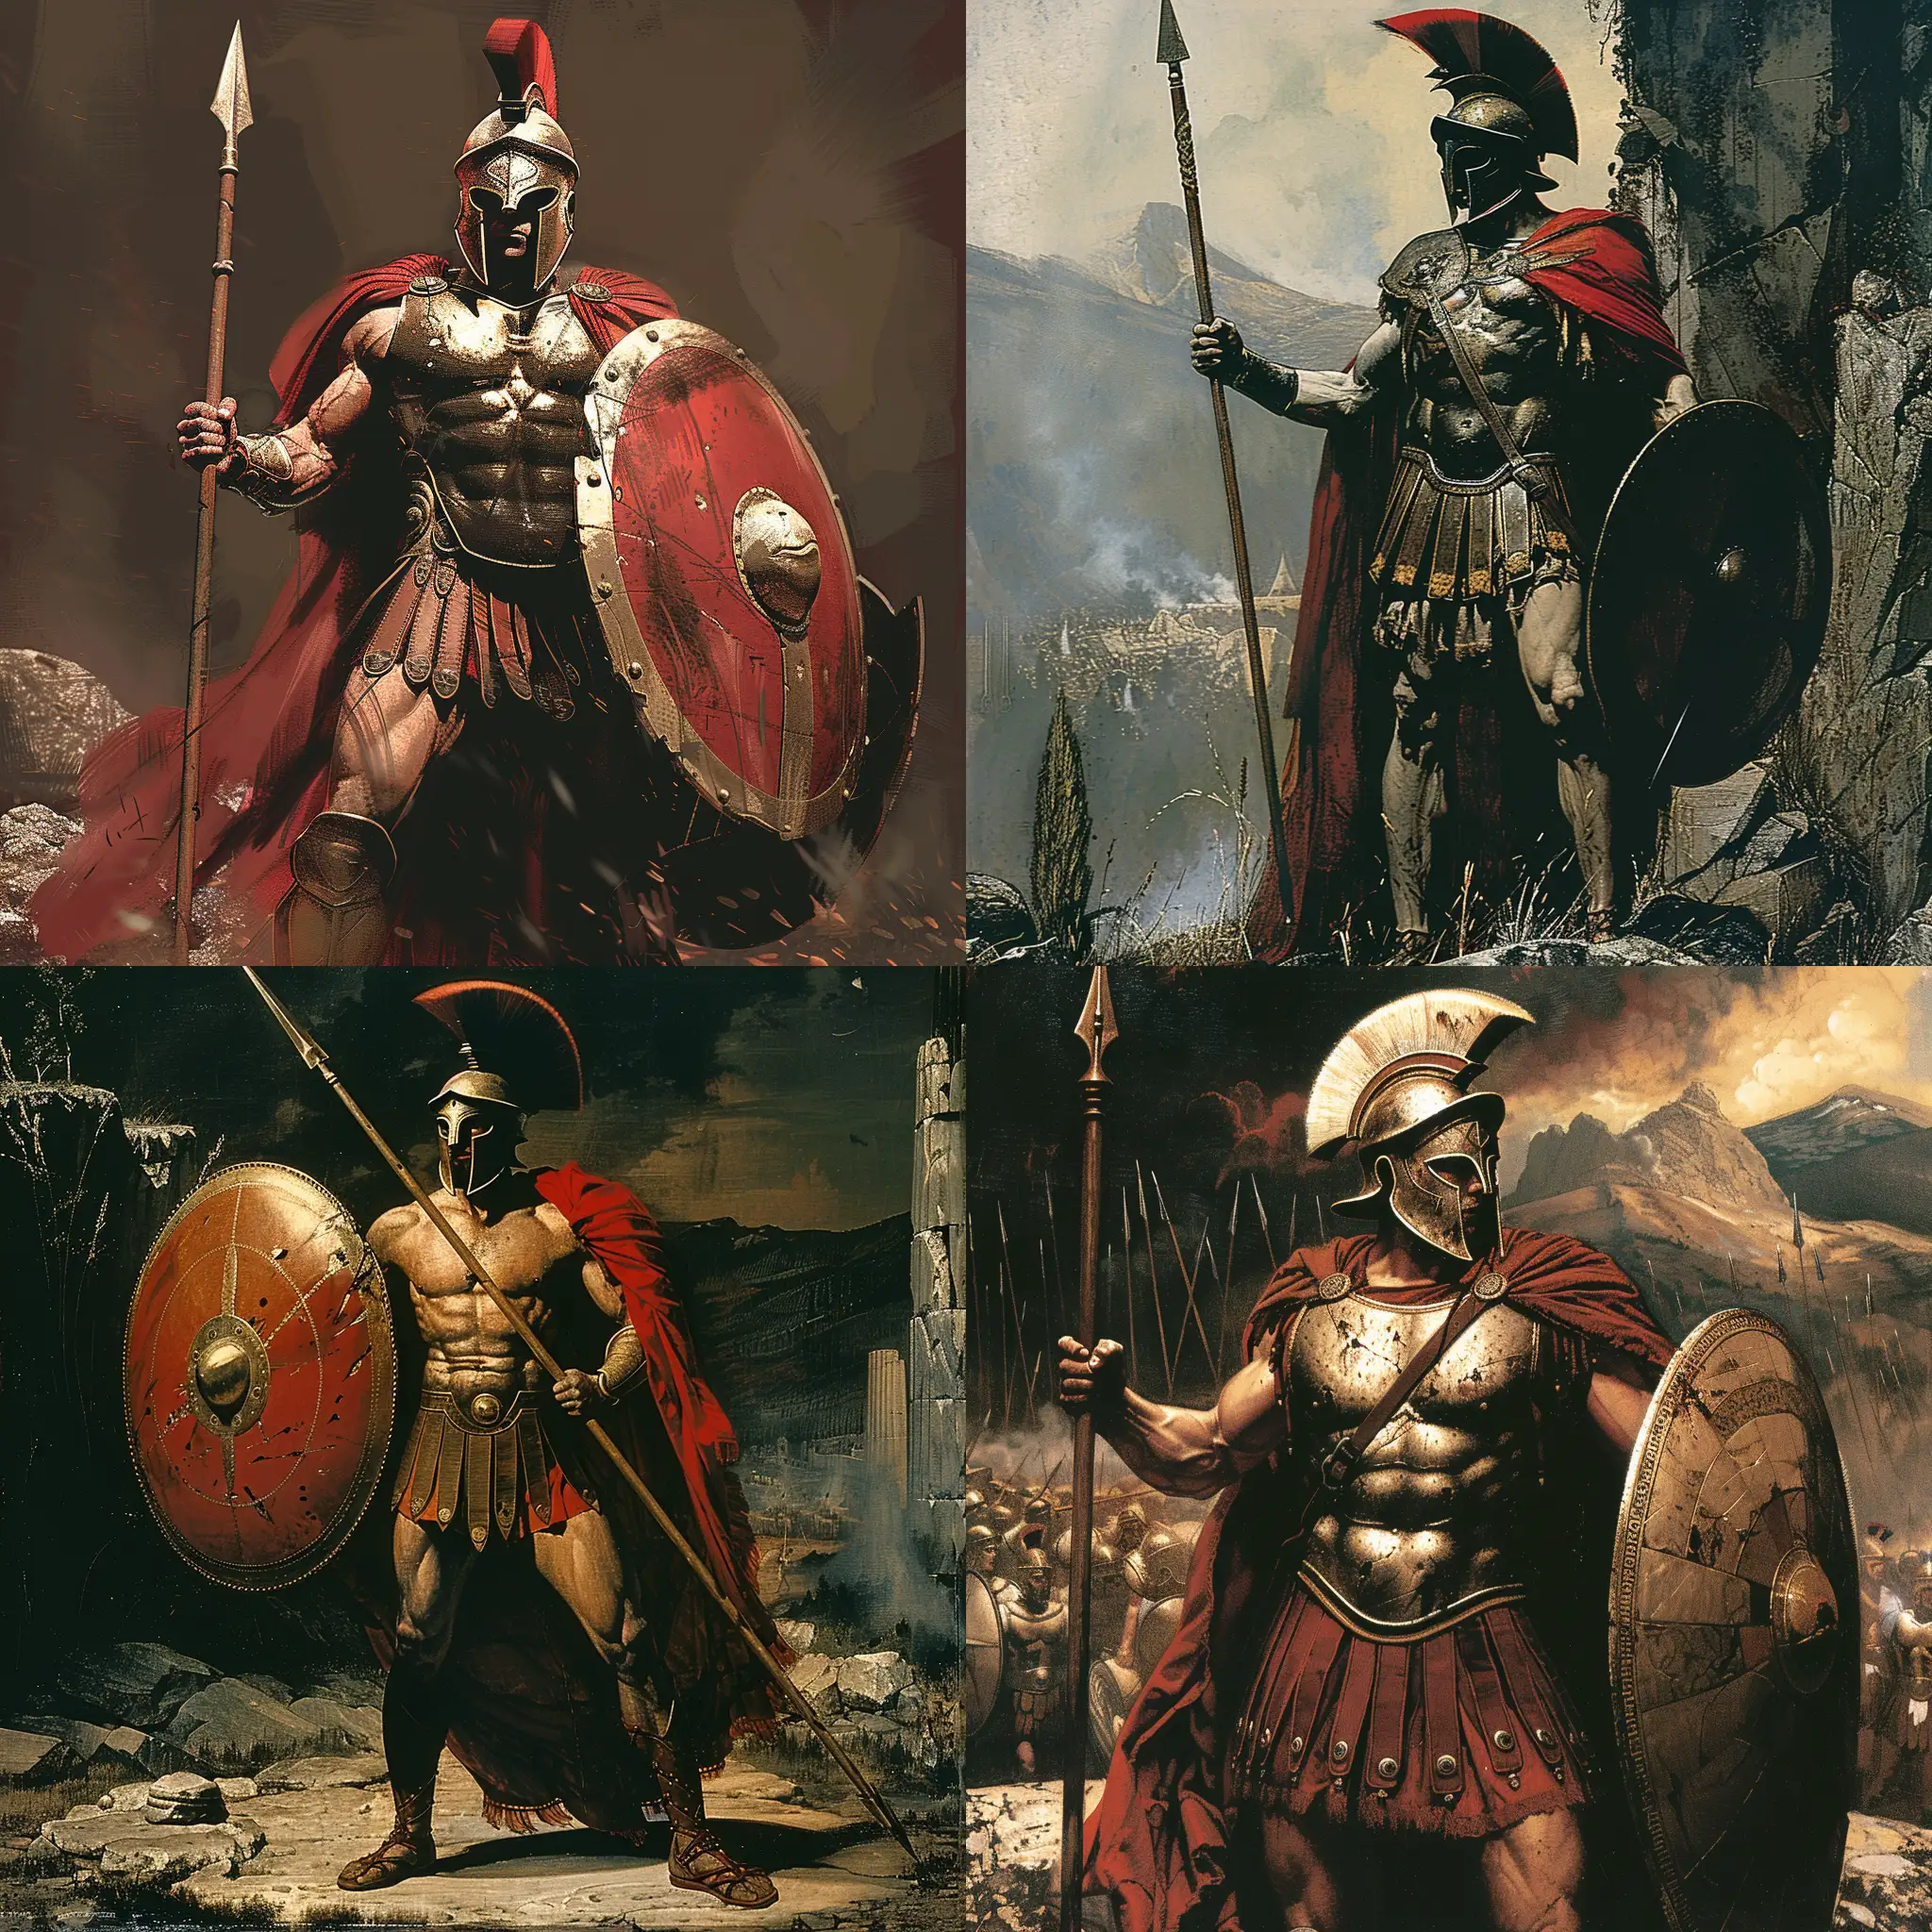 Leonidas, King of Sparta, standing bravely in front of Sparta wielding his spear and shield, artistic style